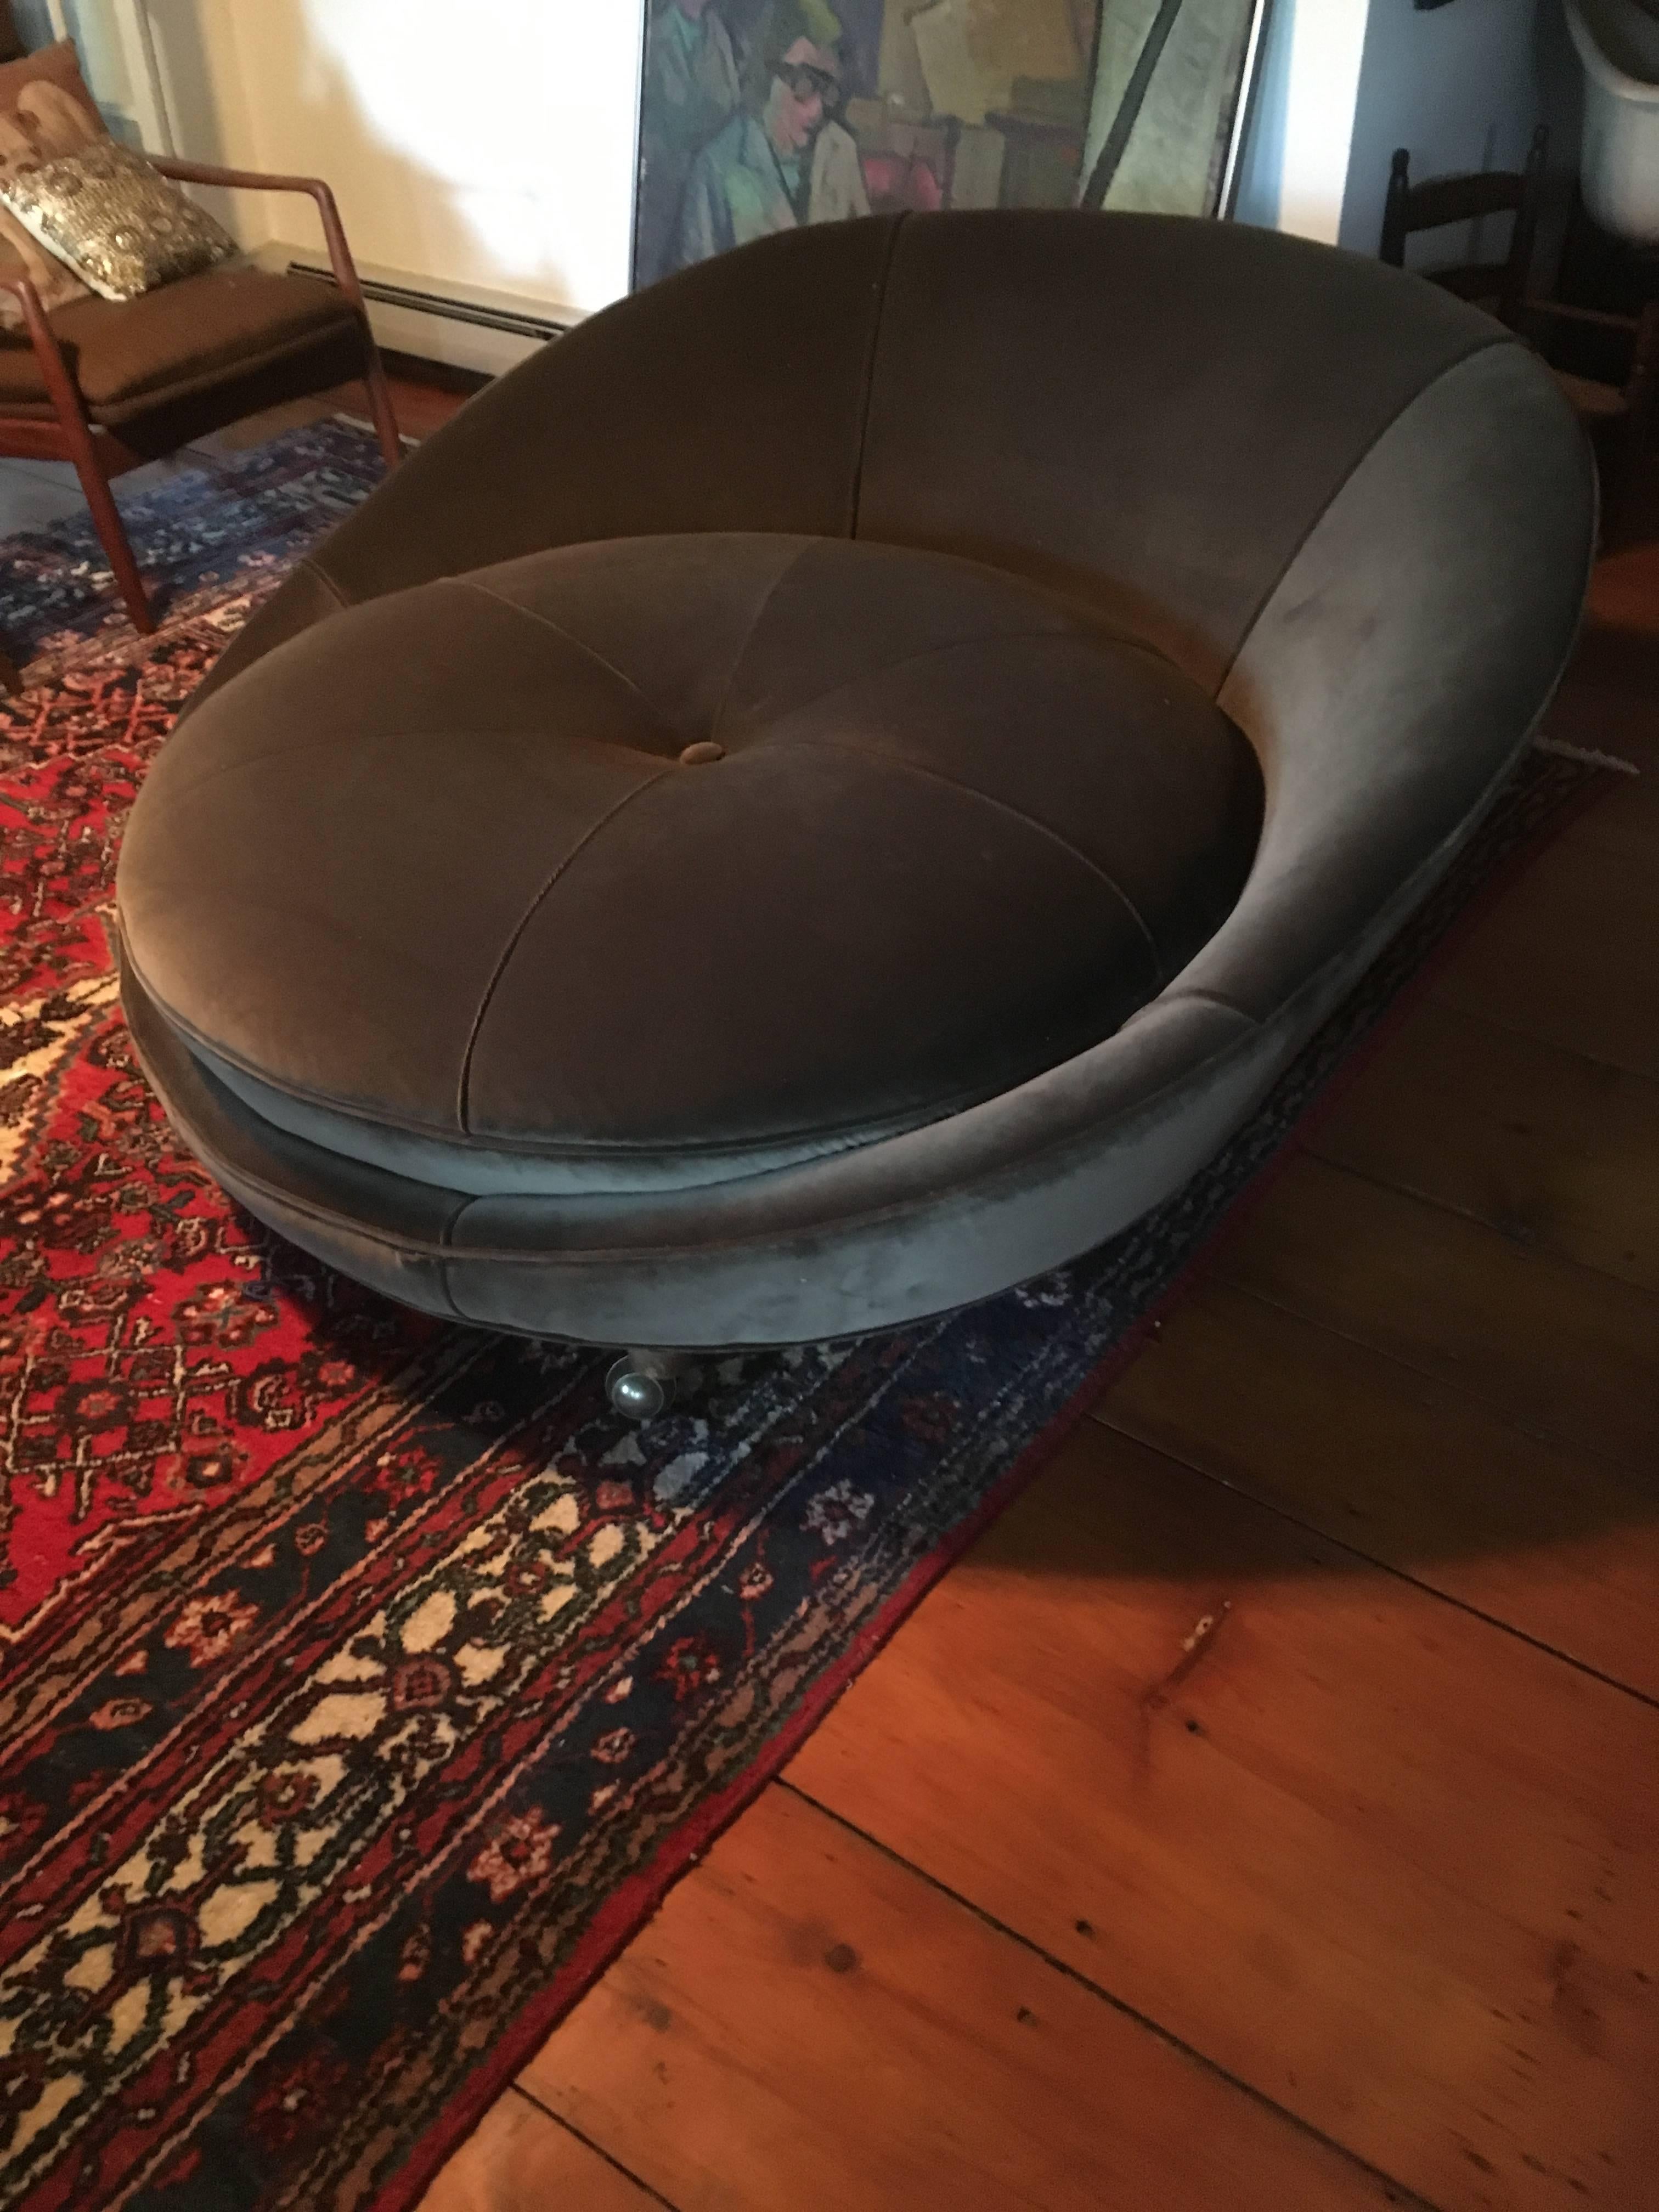 Large round lounge chair by Milo Baughman on castors.
  Newly upholstered in olive green velvet soft Mystere polyester fabric and re-stuffed.
Extremely soft and comfortable.